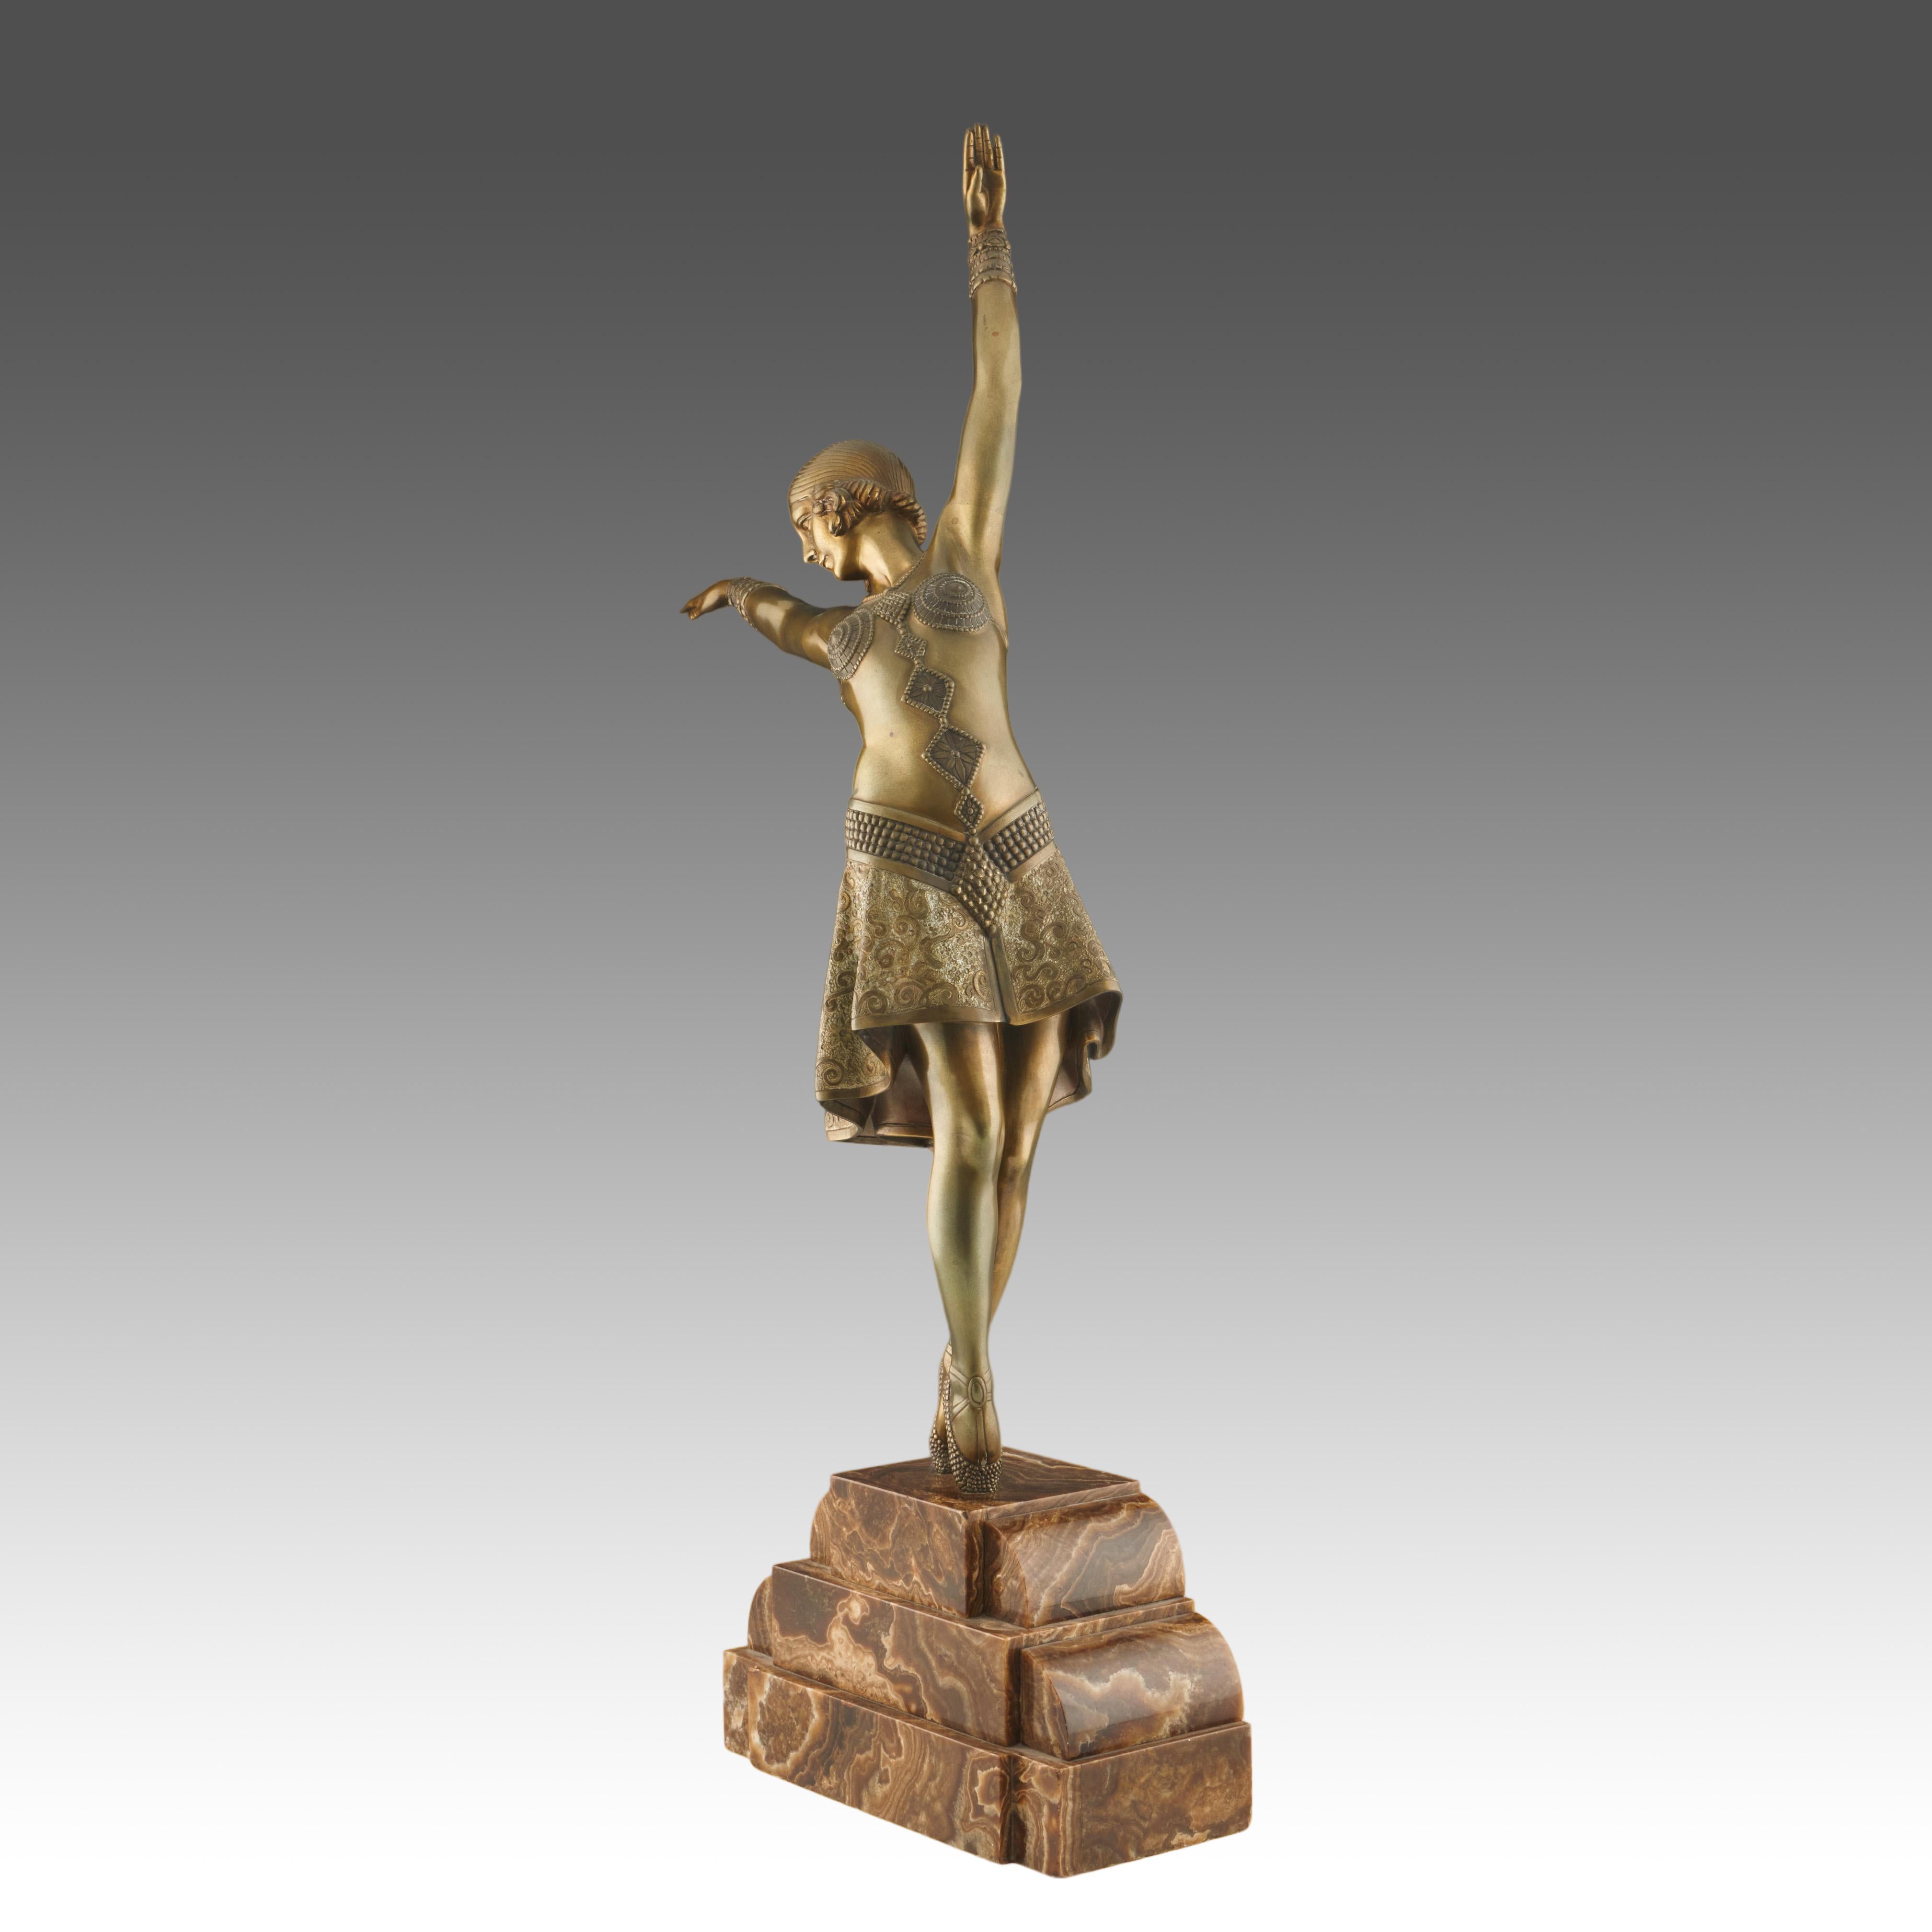 Vedette' an Art Deco cold painted gilt bronze figure by Demetre Chiparus (1886-1947). An energetic dancer dressed in scantily clad theatrical costume with arms outstretched in a stylised pose. Excellent hand finished detail and fine colour. Raised